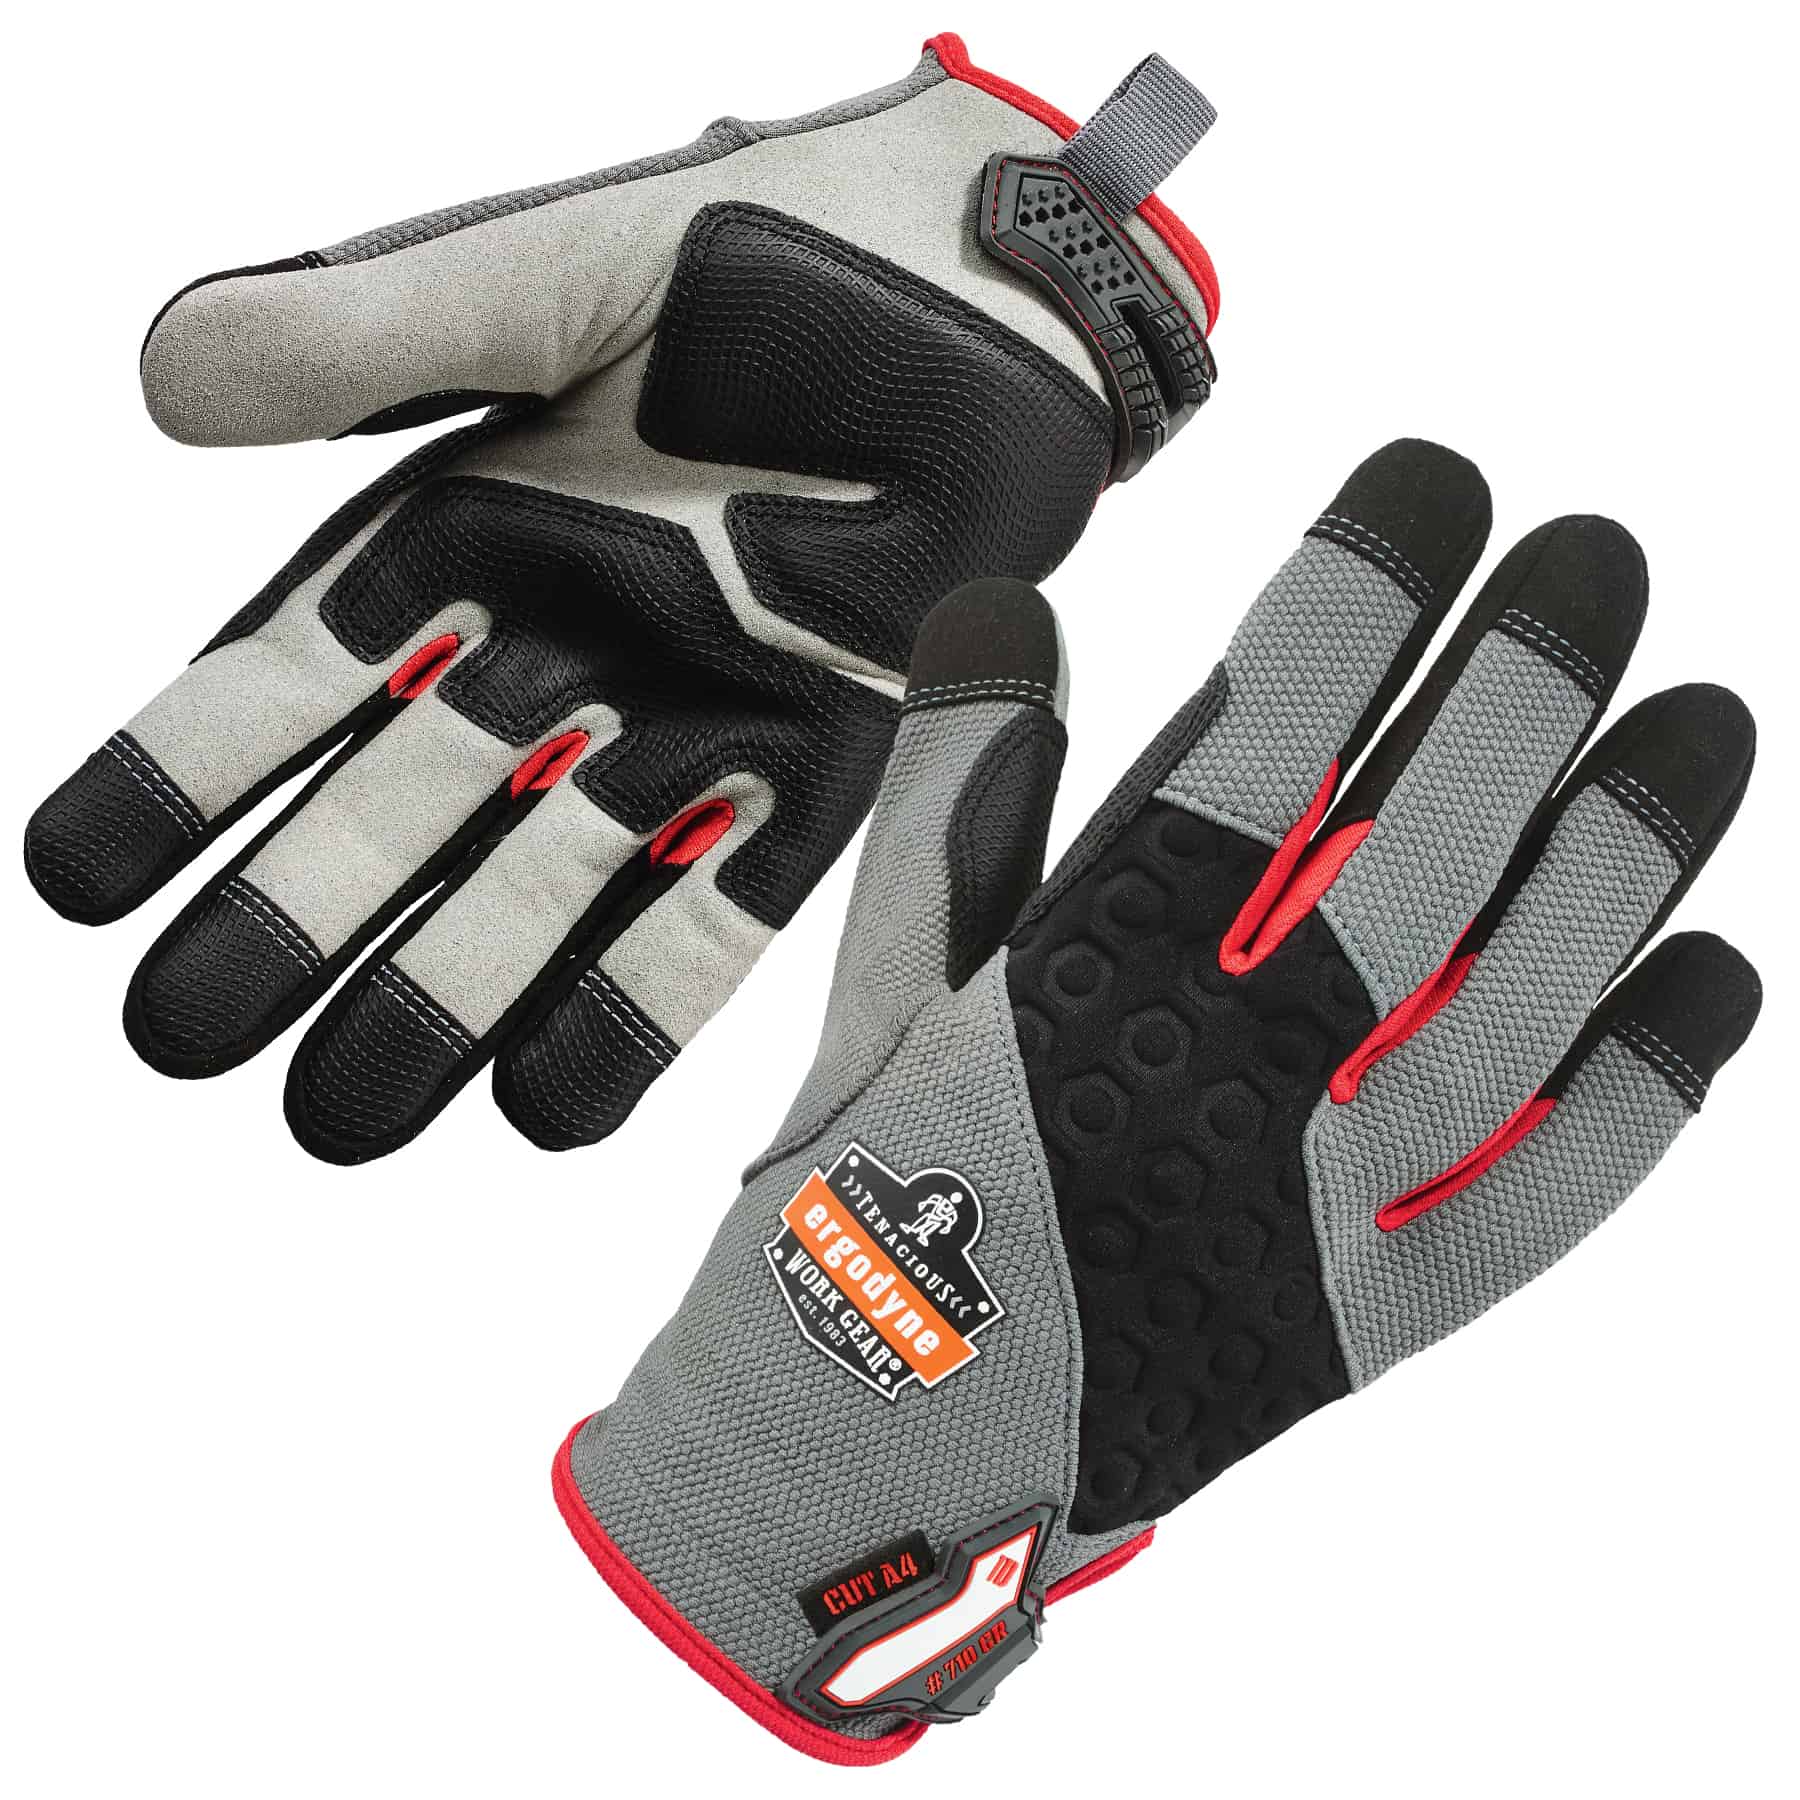 Details about   2 Pairs Cut Resistant Gloves with Level 3 Protection Safety Work Gloves 